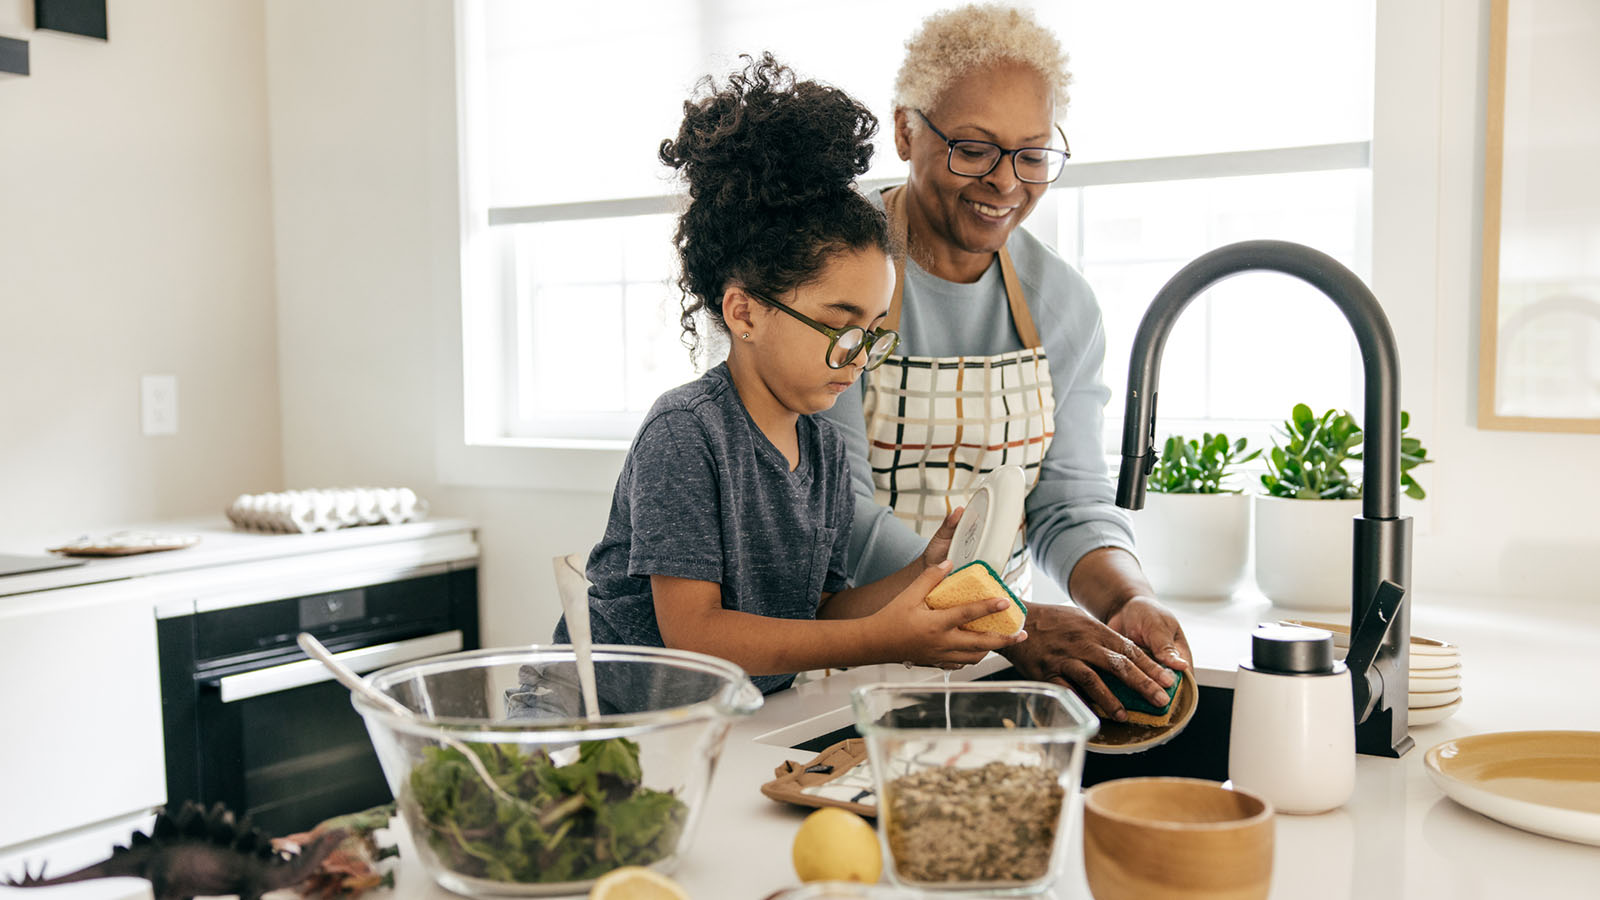 Grandmother and granddaughter preparing a healthy meal together